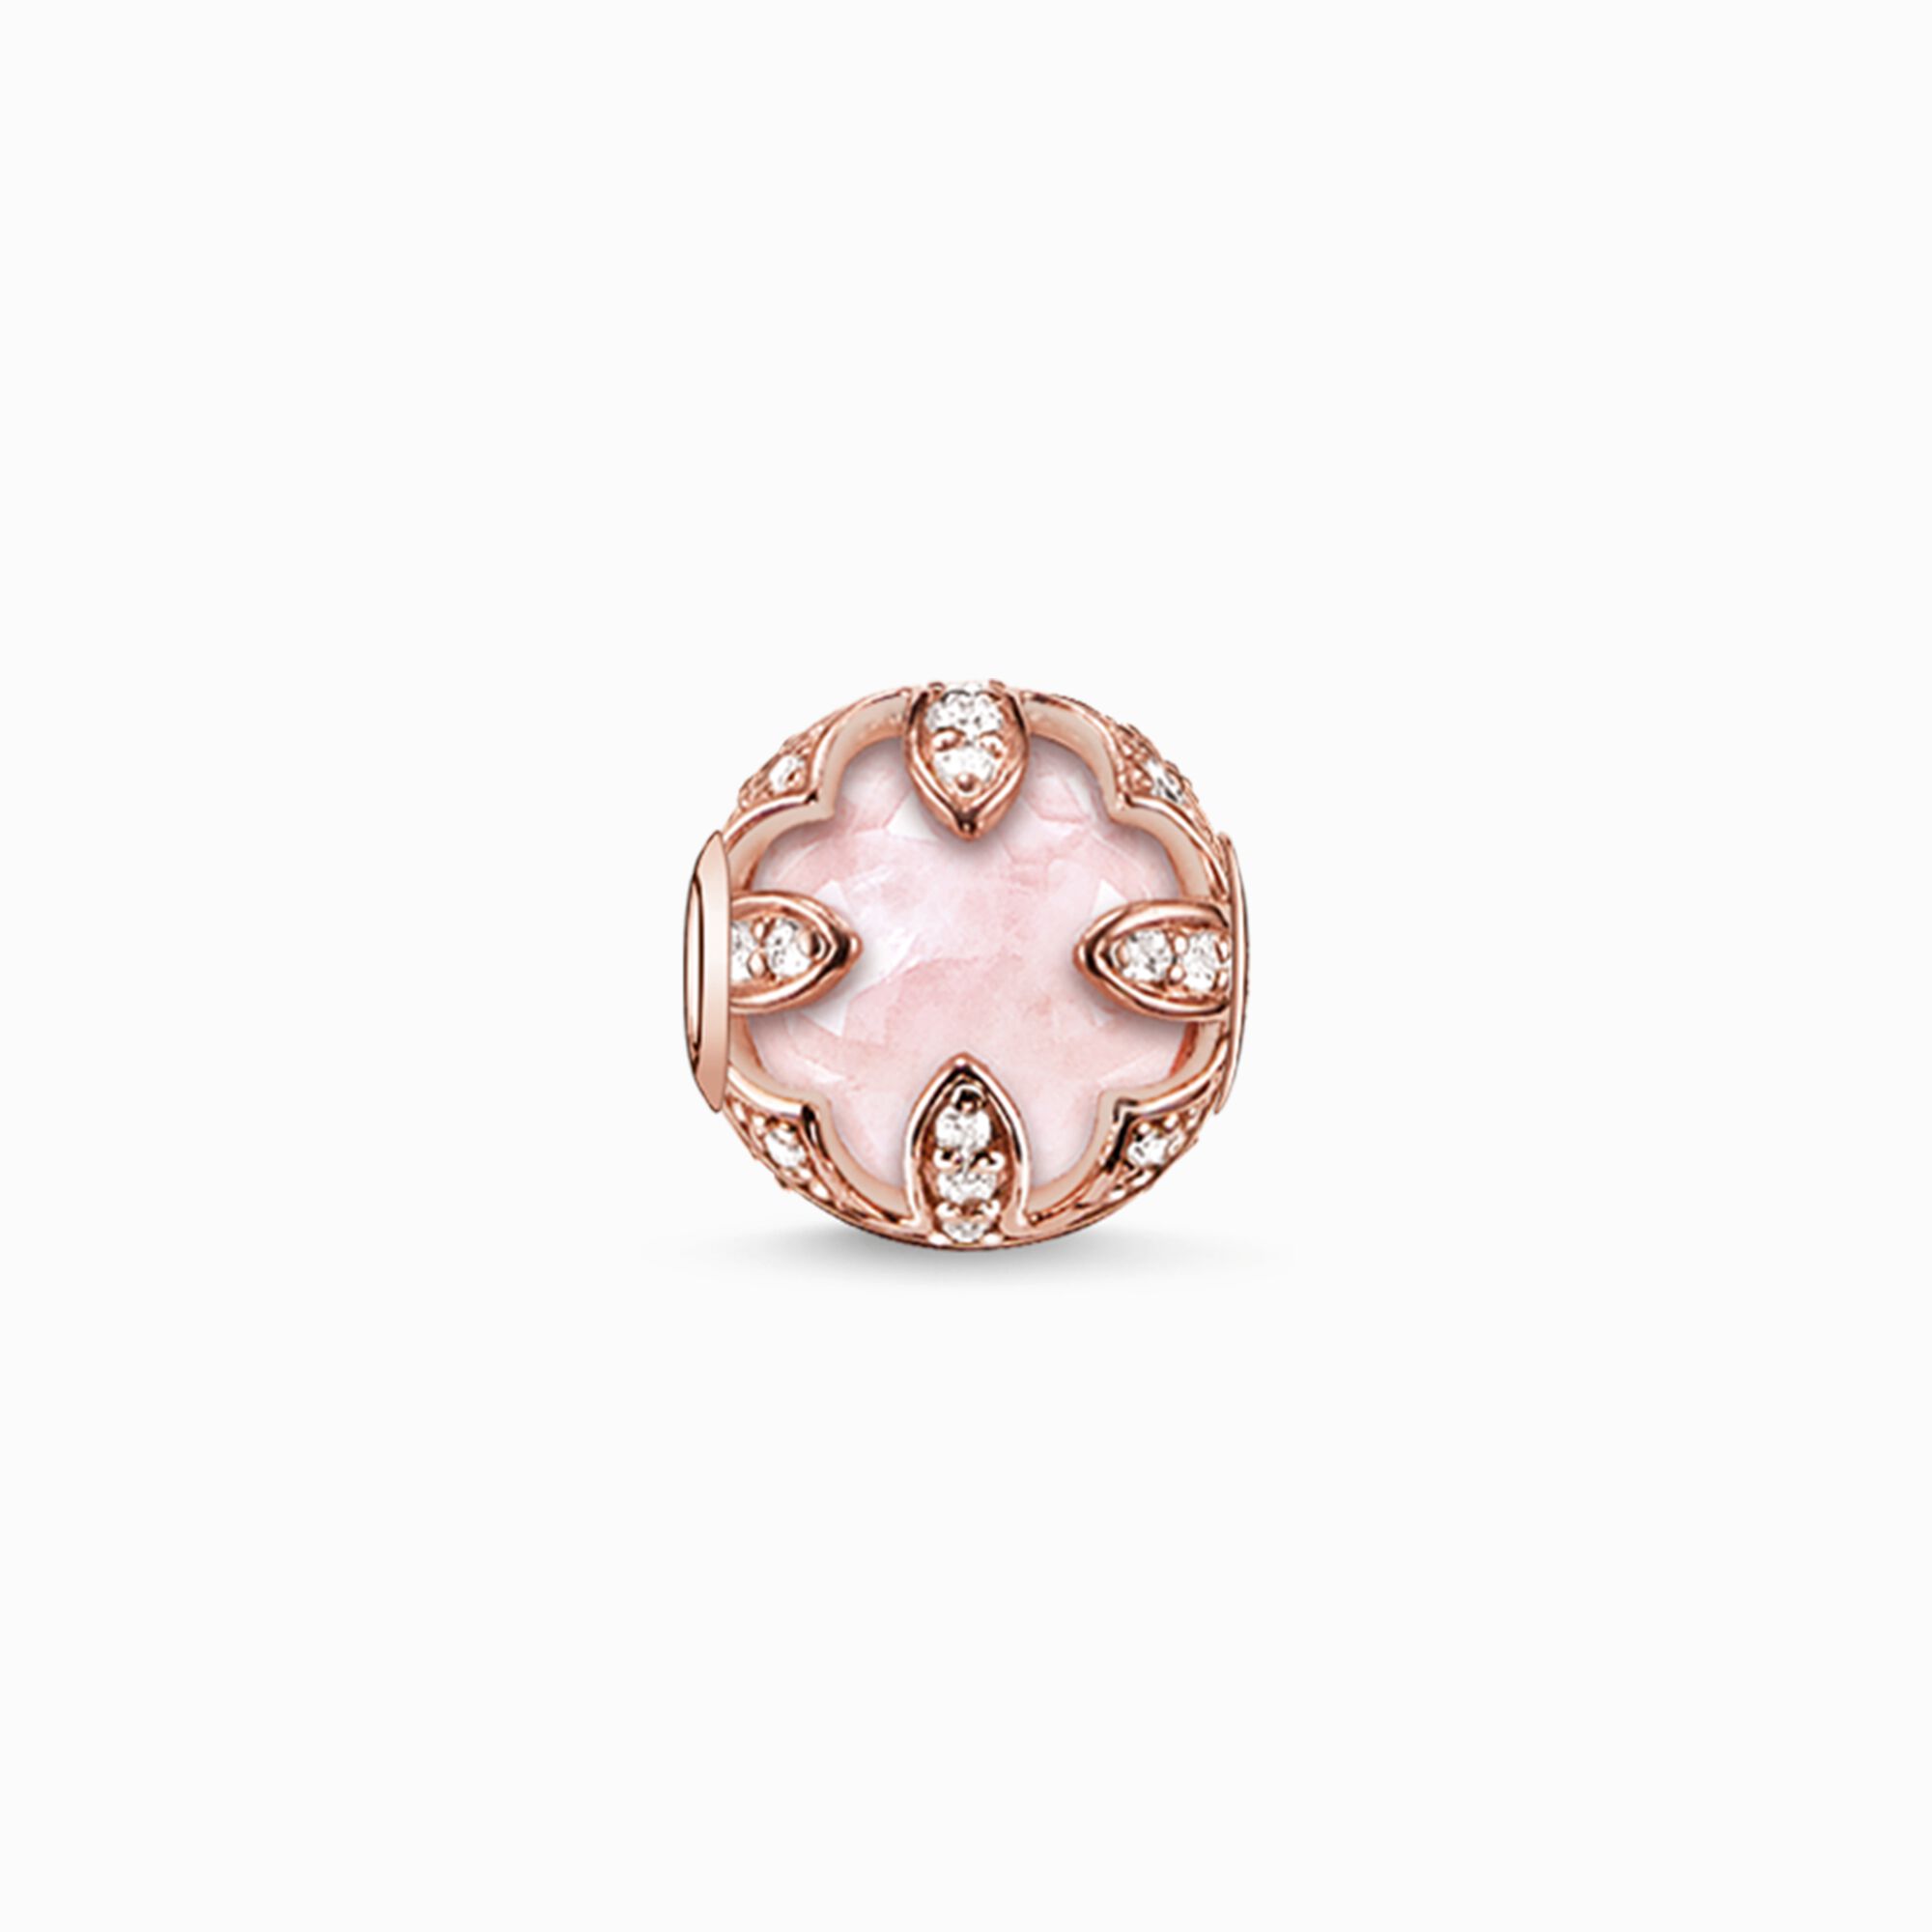 Bead pink lotus from the Karma Beads collection in the THOMAS SABO online store